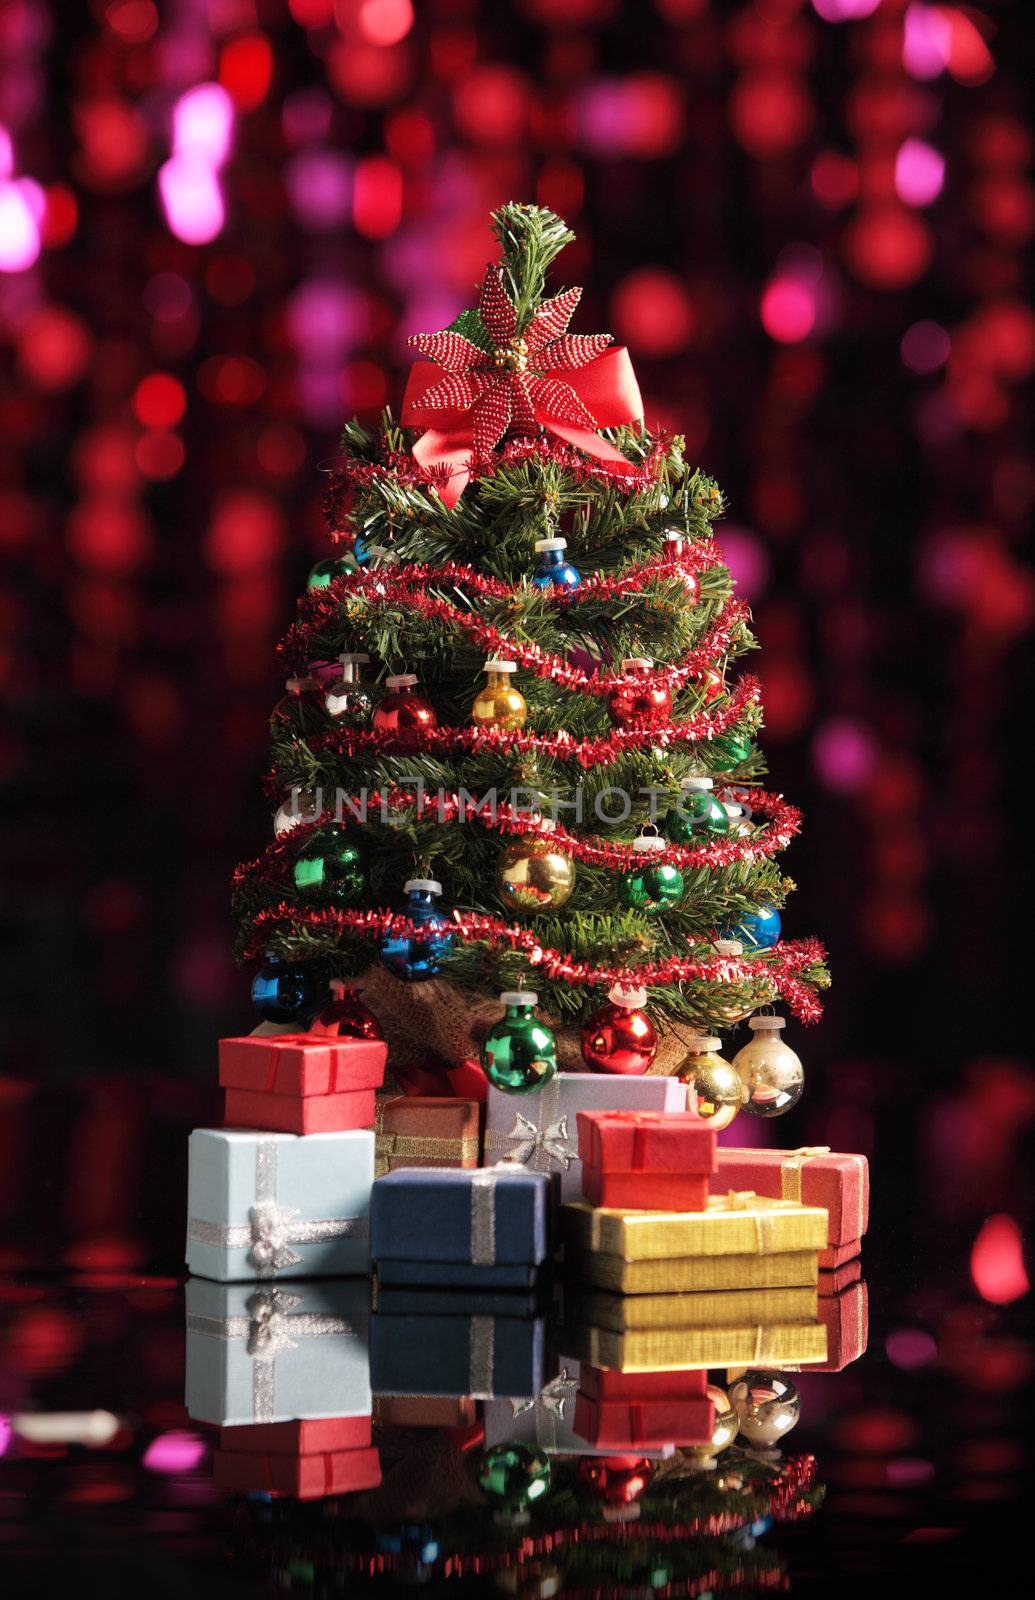 Christmas tree on abstract background with red lights